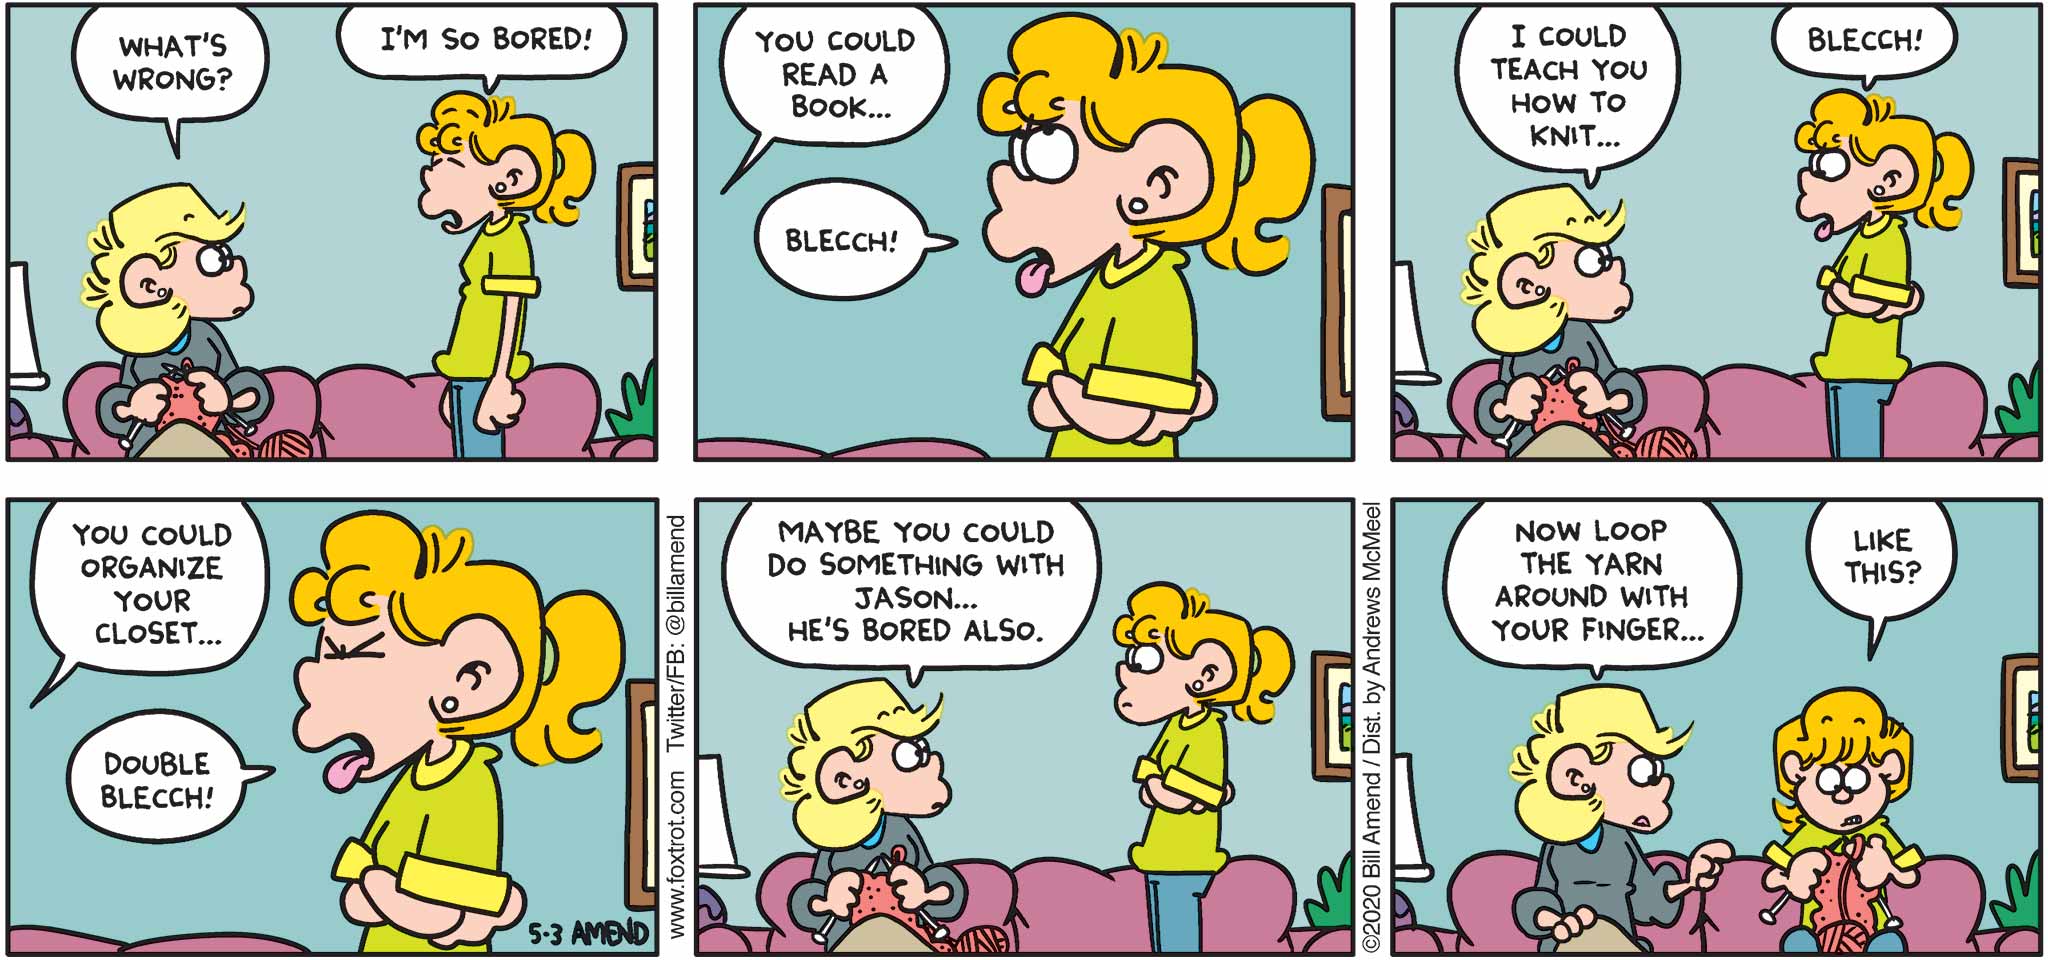 FoxTrot by Bill Amend - "So Bored" published May 3, 2020 - Andy: What's wrong? Paige: I'm so bored! Andy: You could read a book... Paige: Blecch! Andy: I could teach you how to knit... Paige: Blecch! Andy: You could organize your closet... Paige: Blecch! Andy: Maybe you could do something with Jason... He's bored also. Now loop the yarn around with your finger... Paige: Like this?